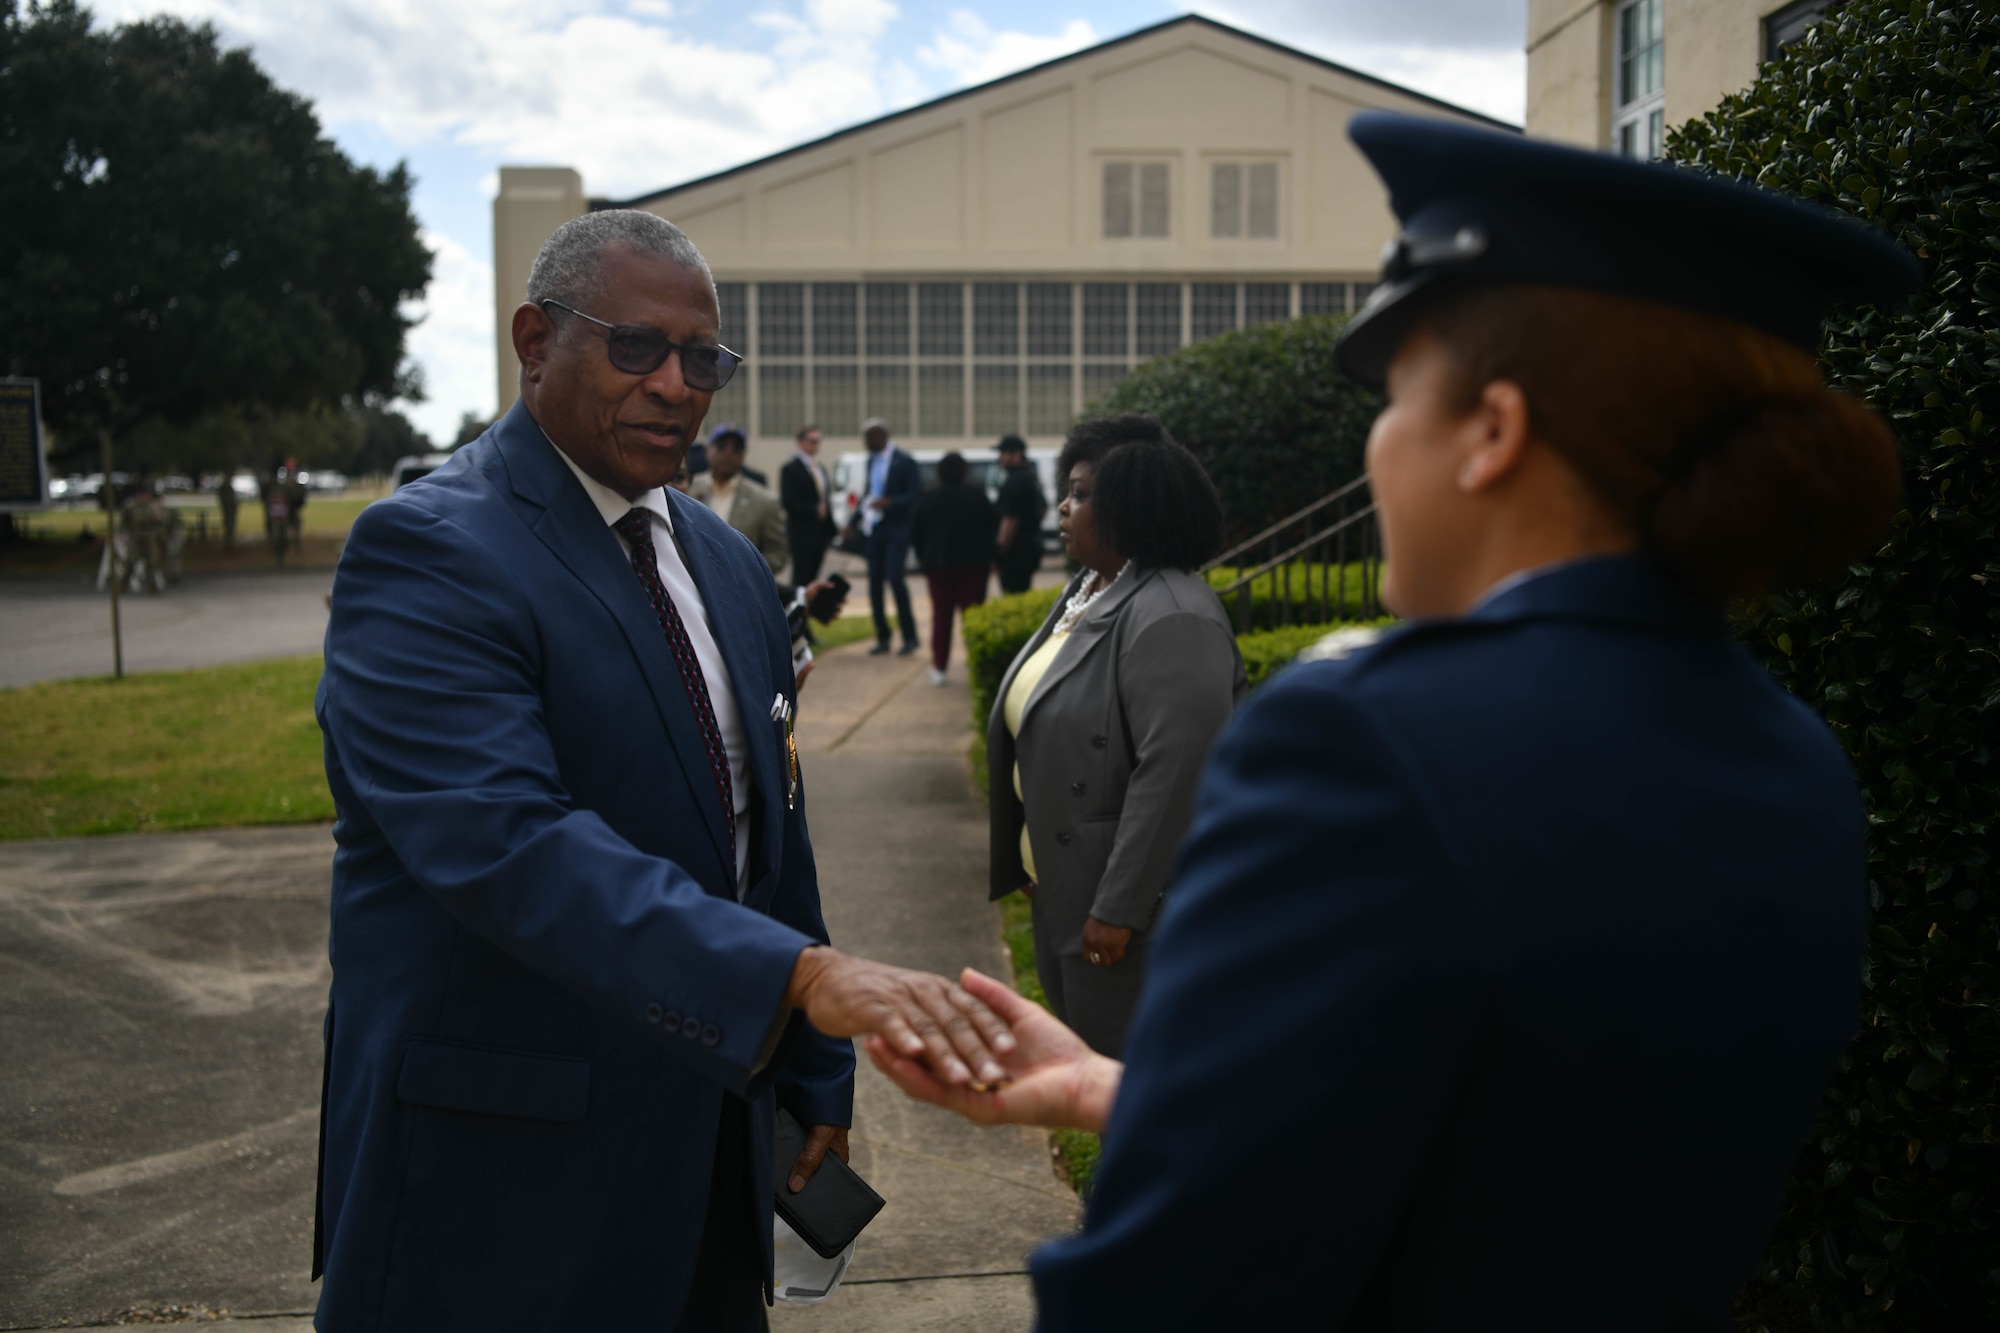 Col. Eries Mentzer, 42nd Air Base Wing commander, greets Mayor James Perkins, Mayor of Selma, on Maxwell Air Force Base, Alabama March 6, 2022. Vice President Kamala Harris visited Selma to commemorate the 57th anniversary of Bloody Sunday, a civil rights march that turned to tragedy. (U.S. Air Force photo by Senior Airman Jackson Manske)